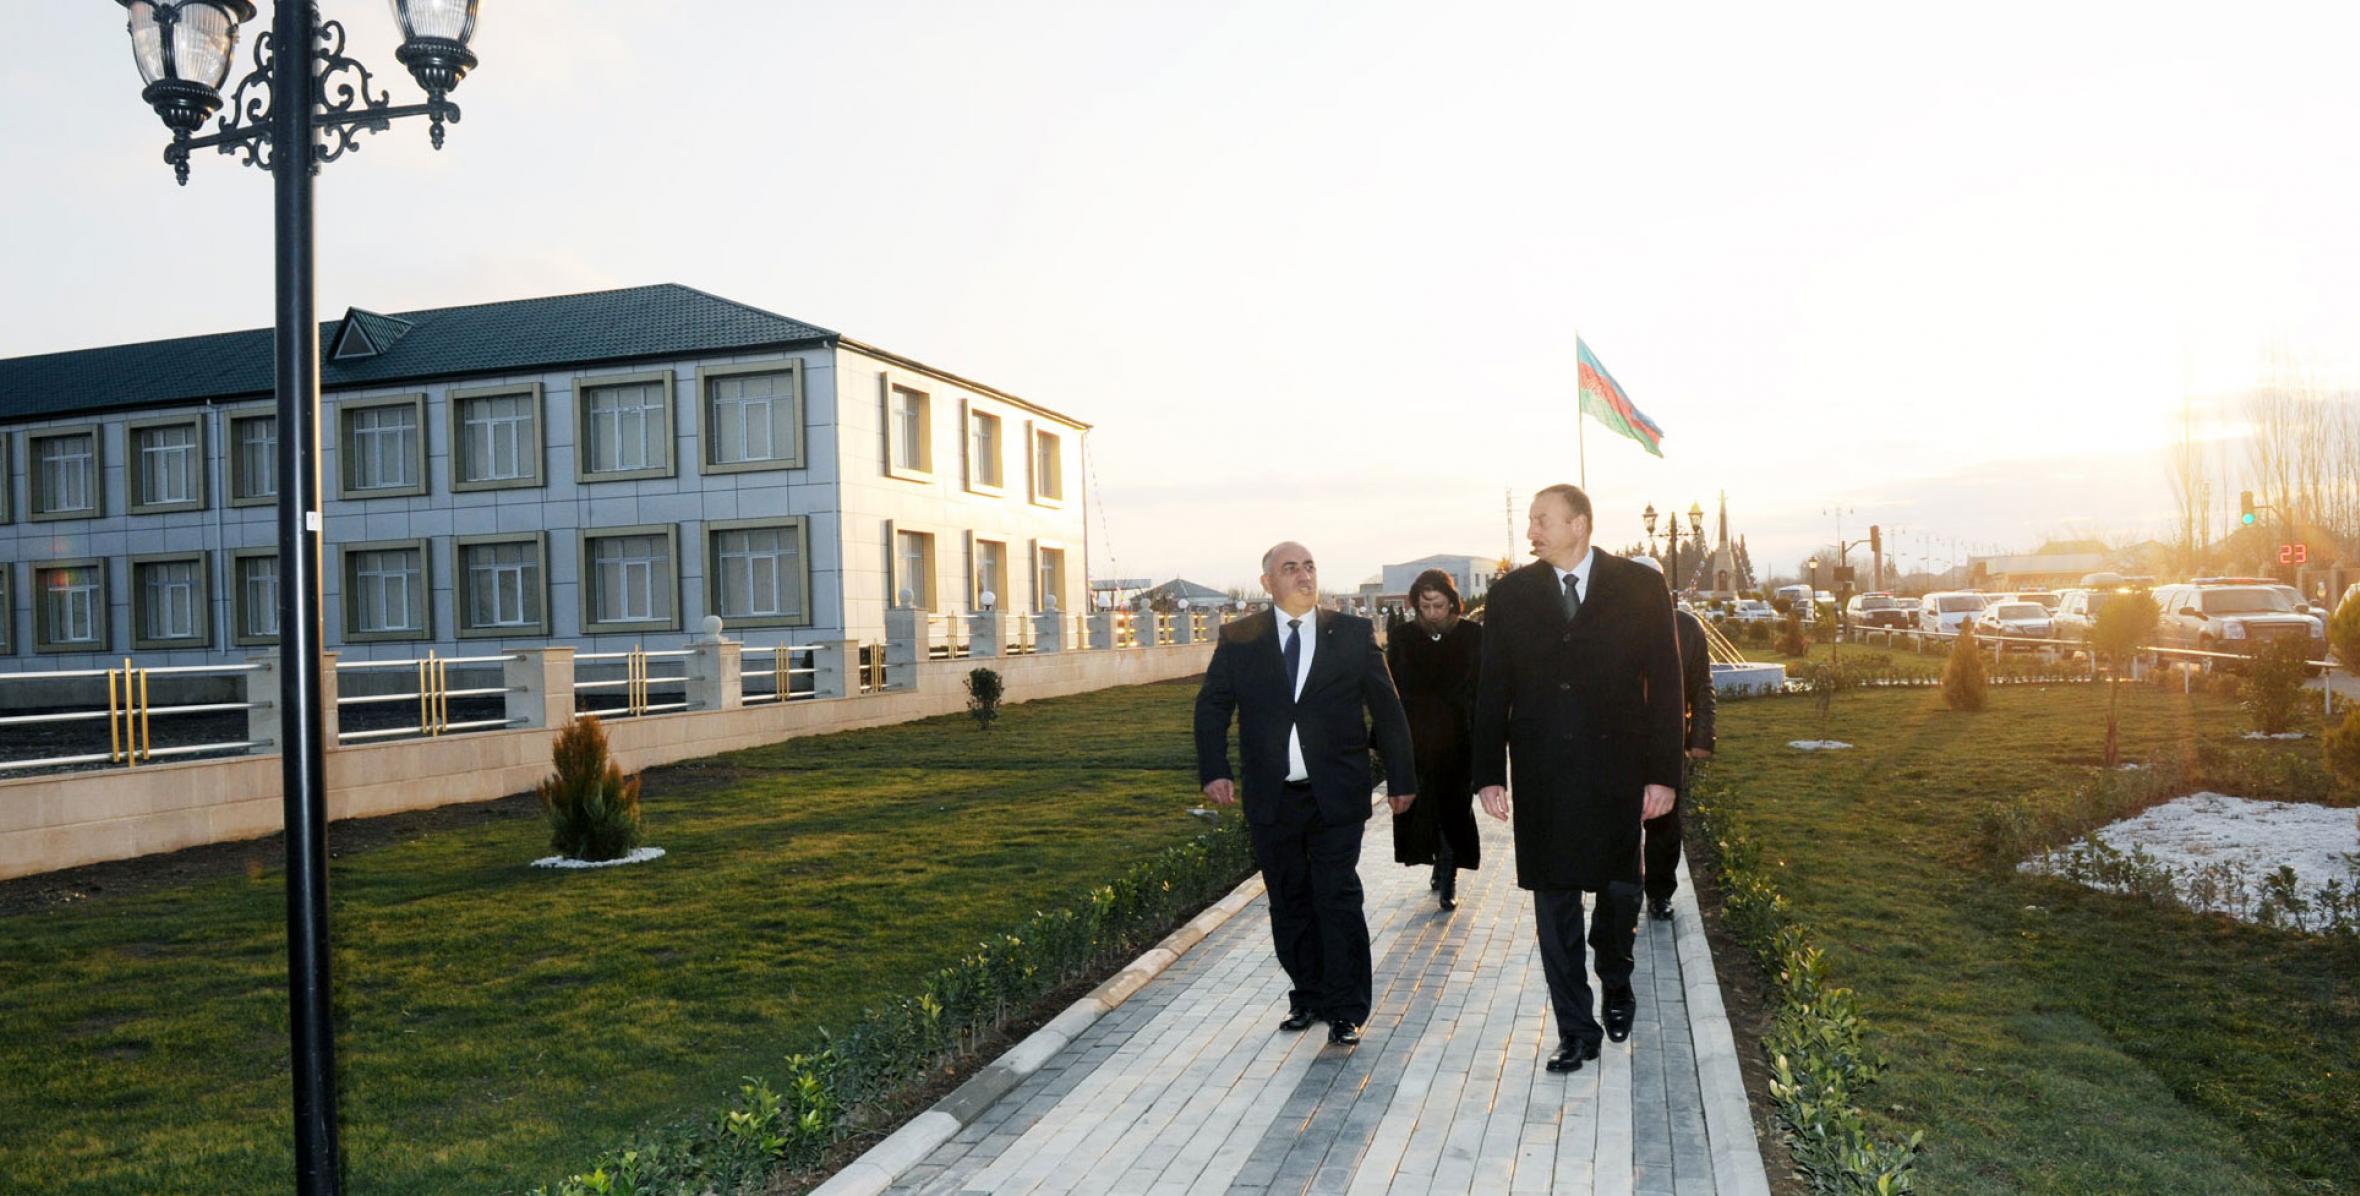 Ilham Aliyev participated at the opening of a park named after Nizami Ganjavi in Goranboy